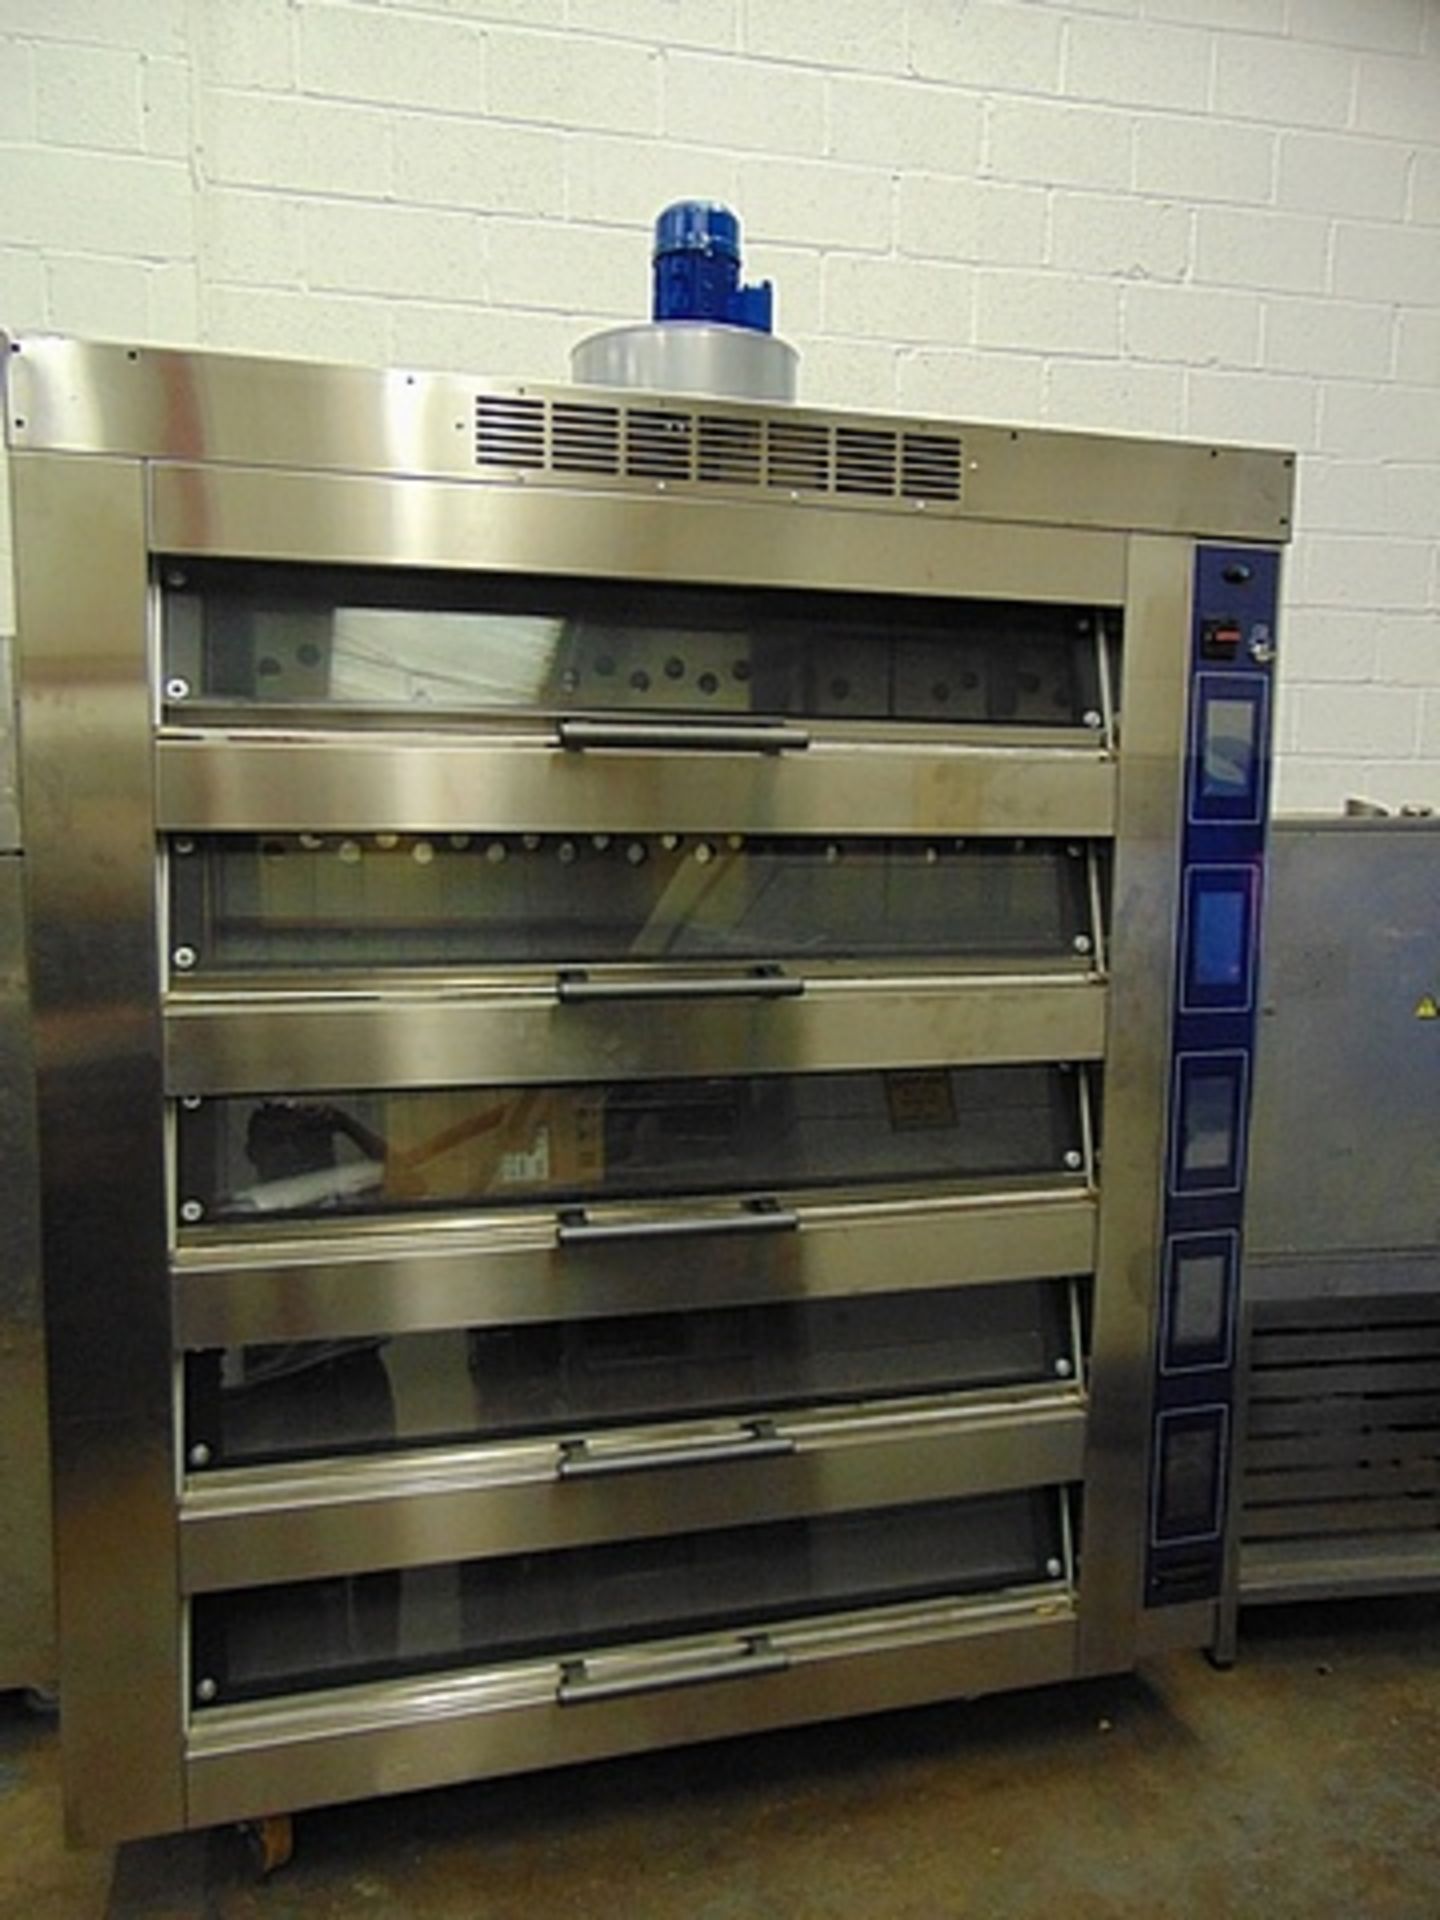 Danziforni model SC3T7646 stainless steel mini deck oven electric year 2003